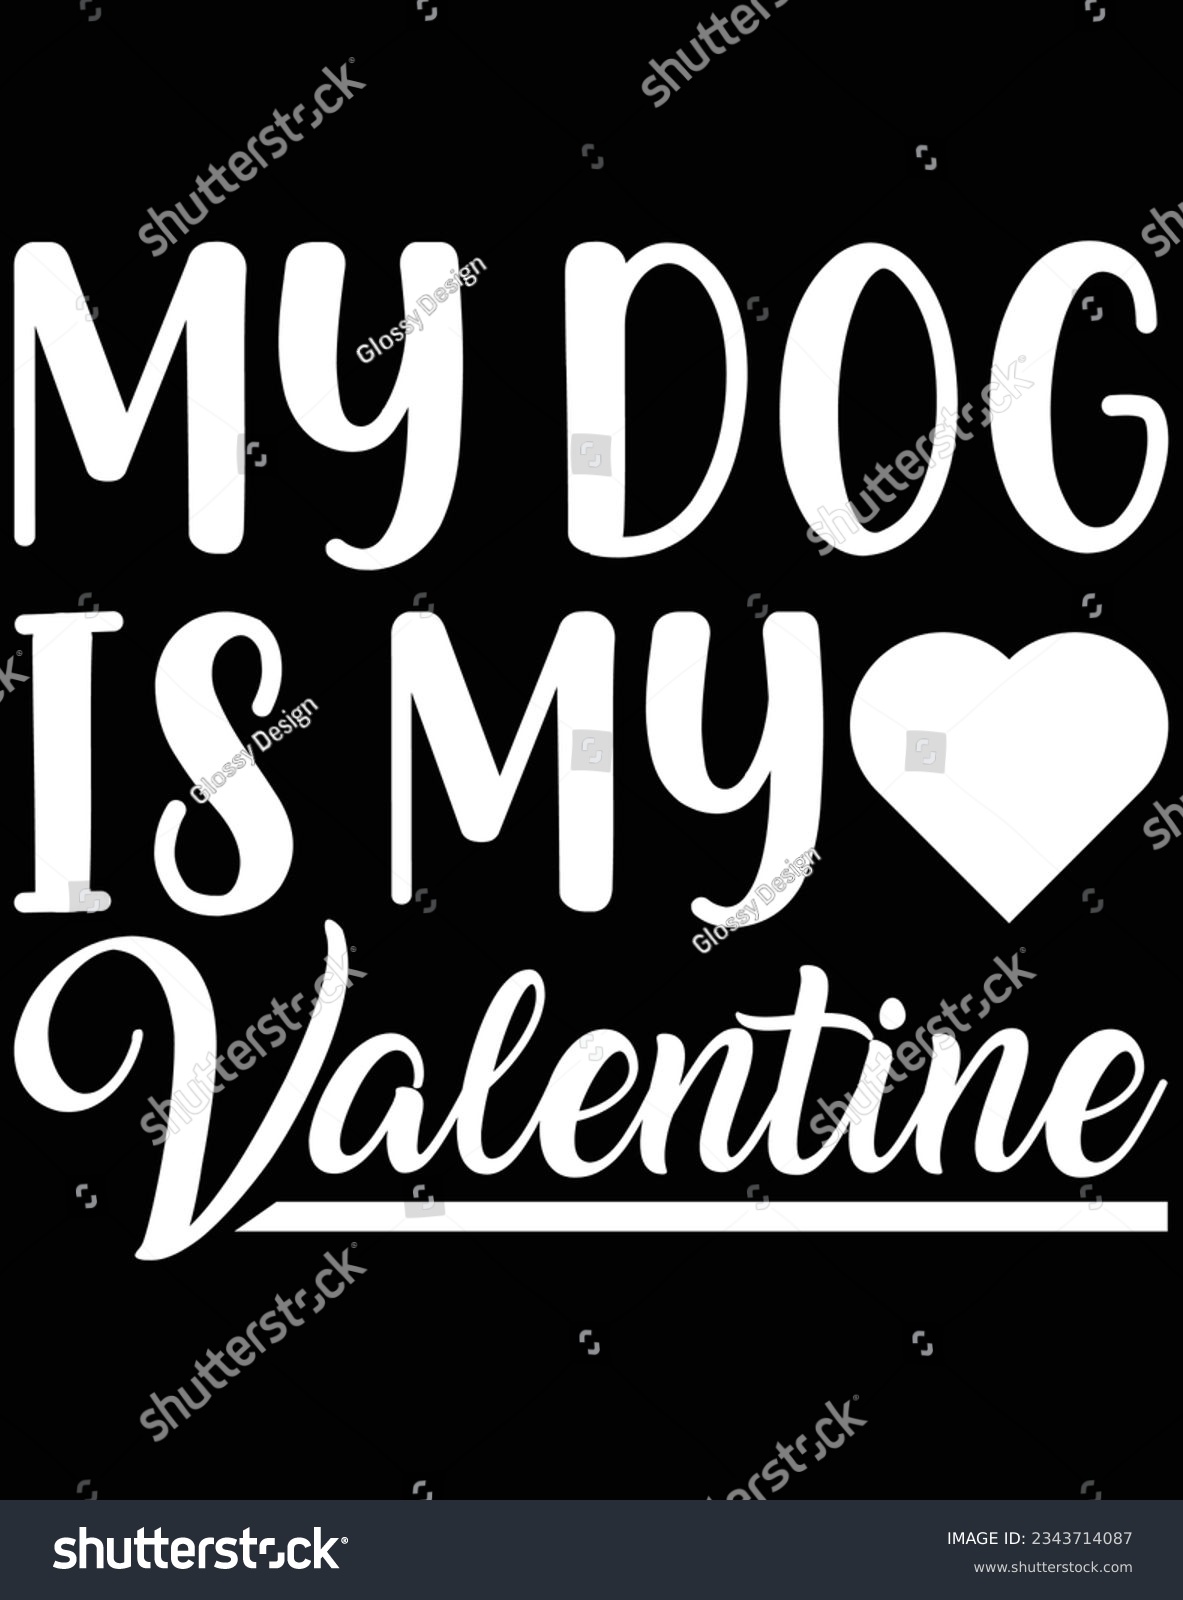 SVG of My dog is my valentine EPS file for cutting machine. You can edit and print this vector art with EPS editor. svg